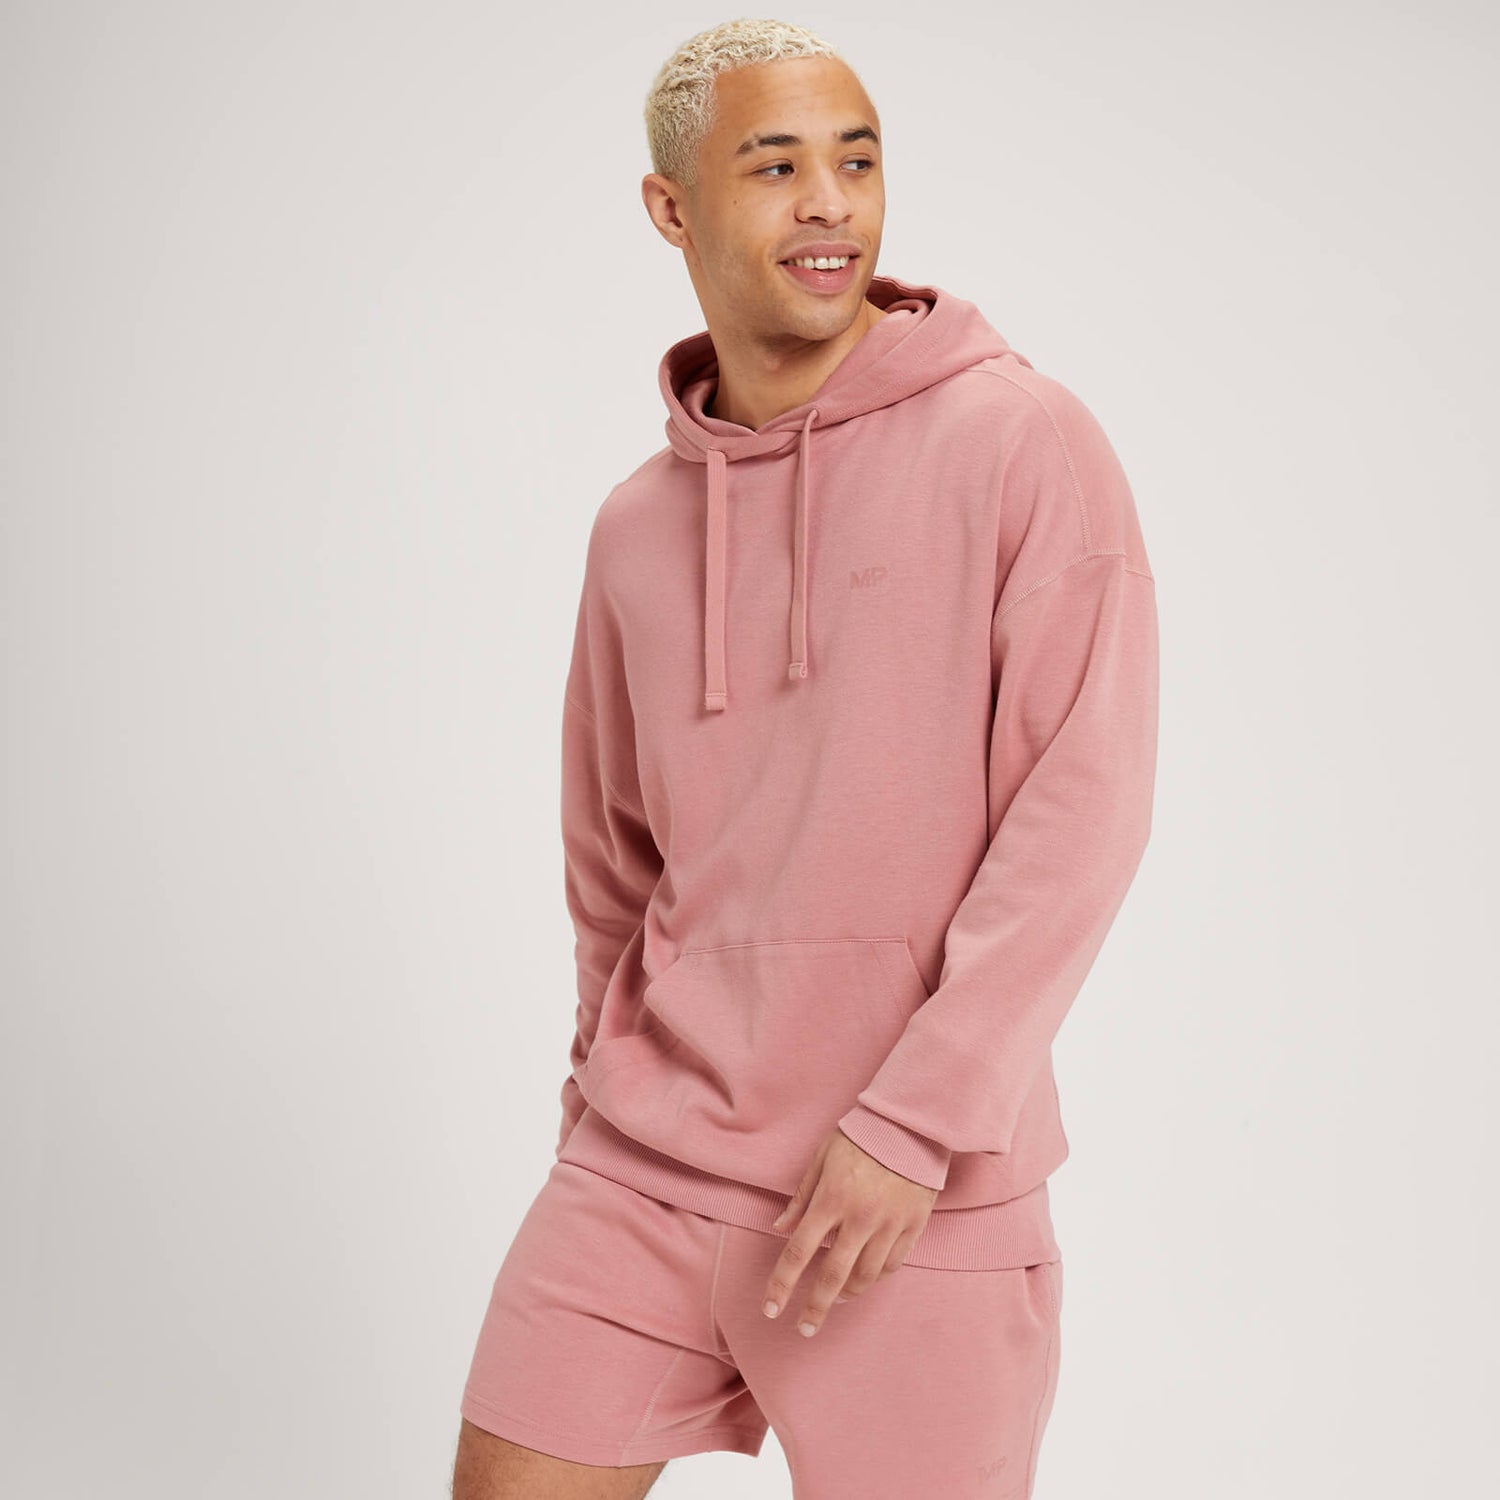 MP Men's Composure Hoodie - Washed Pink - XXS